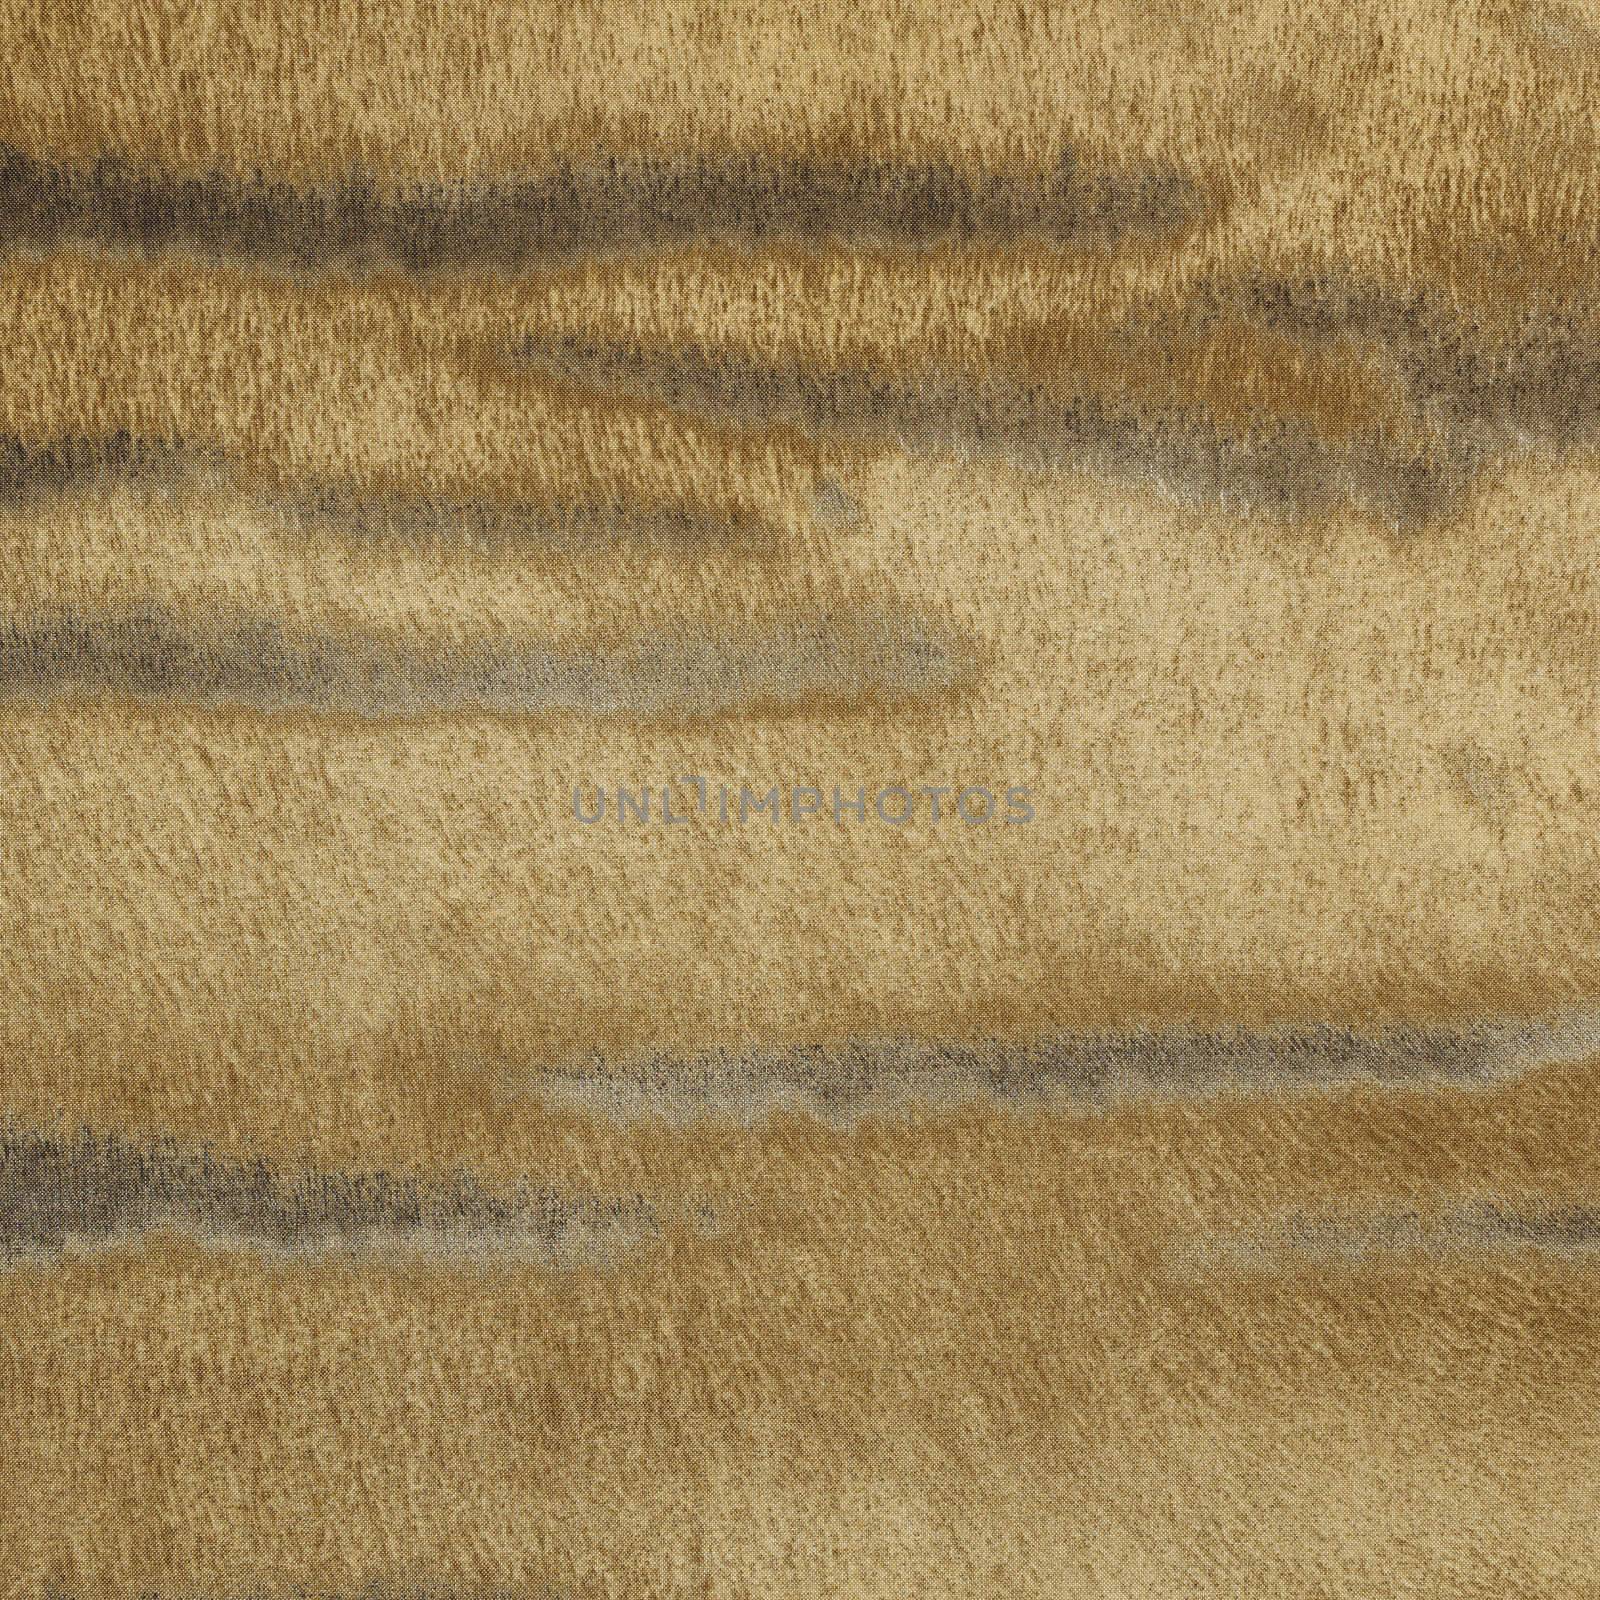 High resolution texture. Abstract background